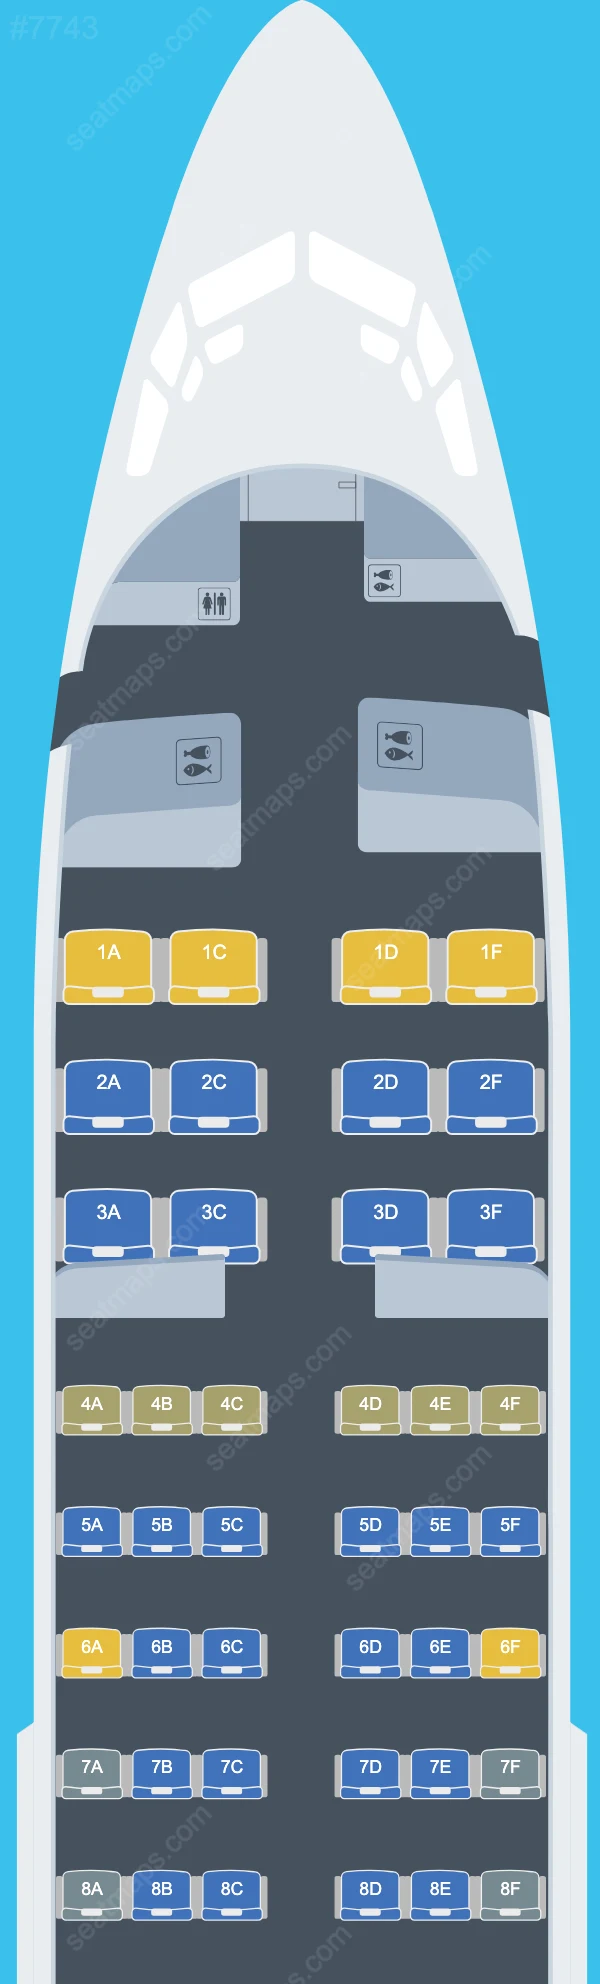 MIAT Mongolian Airlines Boeing 737 Seat Maps 737-700 V.1